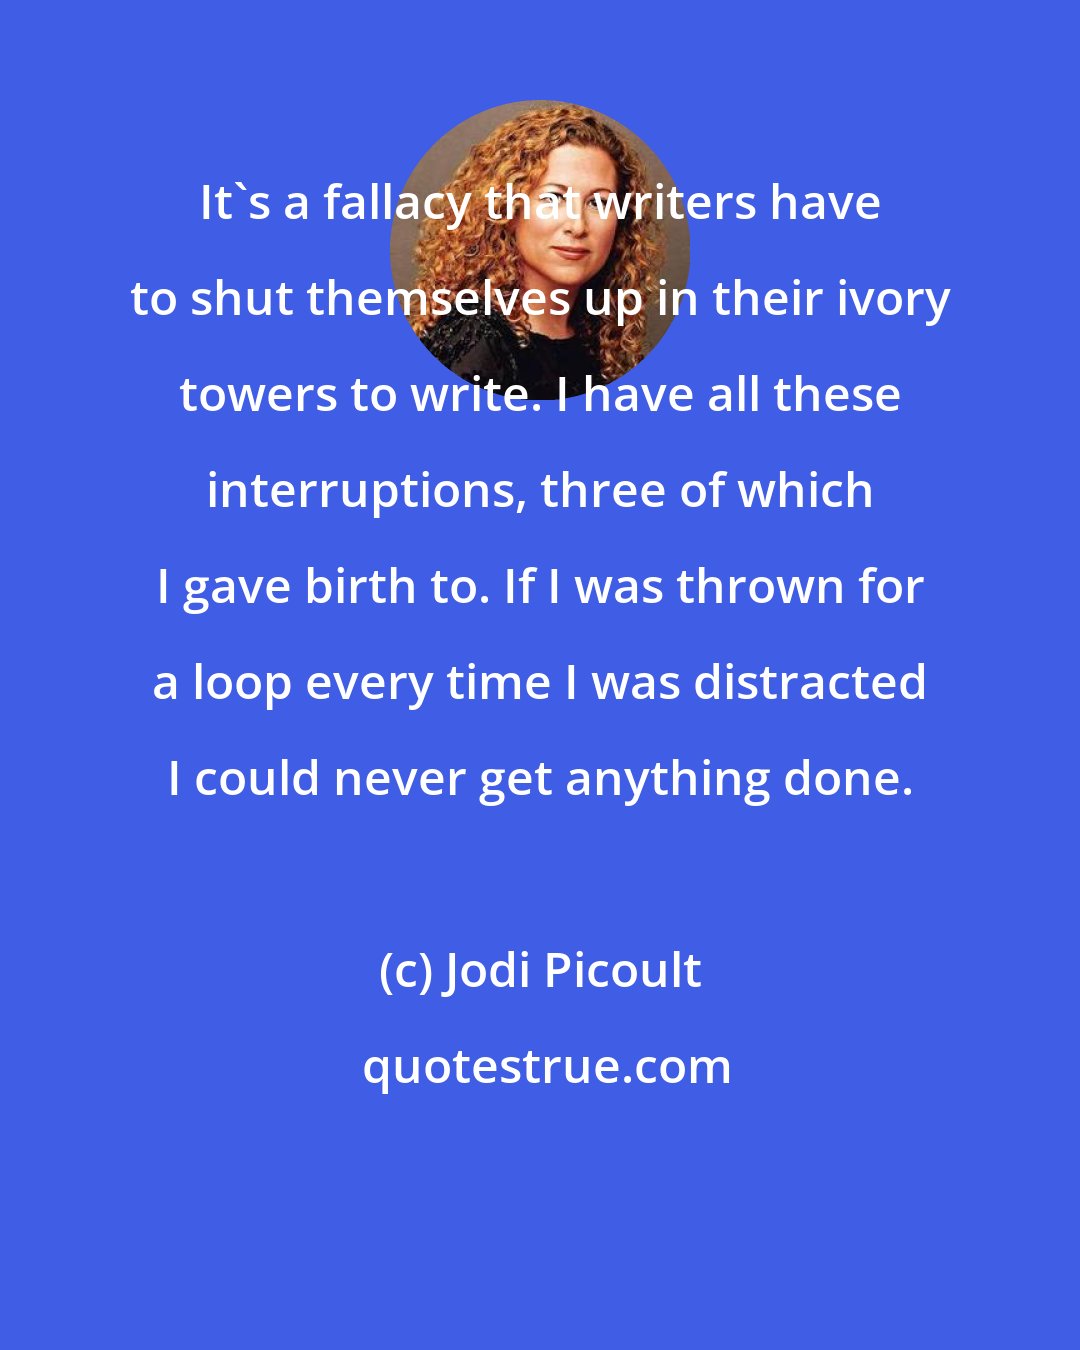 Jodi Picoult: It's a fallacy that writers have to shut themselves up in their ivory towers to write. I have all these interruptions, three of which I gave birth to. If I was thrown for a loop every time I was distracted I could never get anything done.